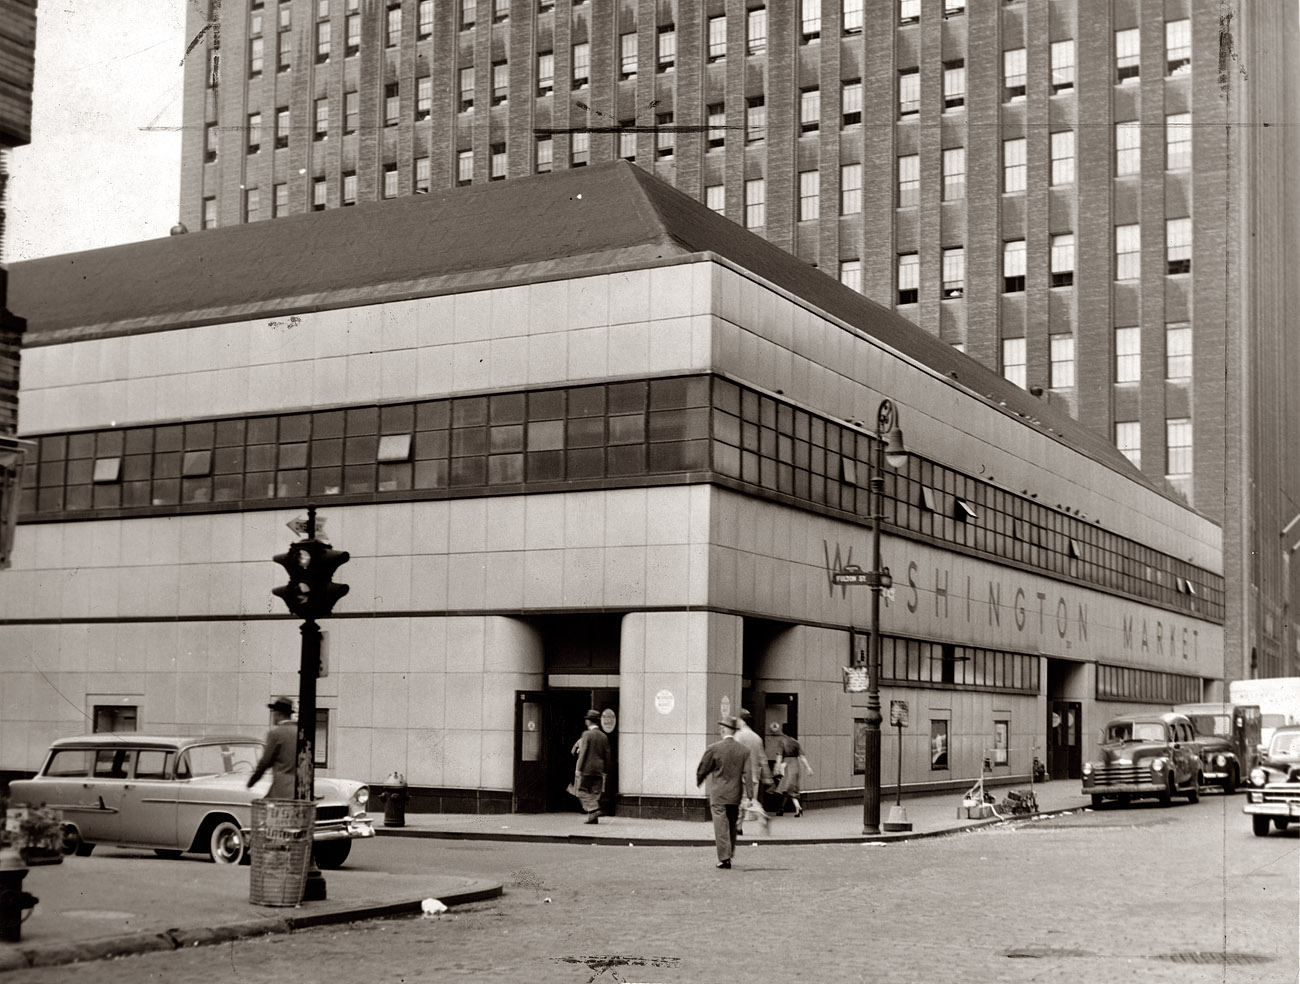 Part of Washington Market in 1956, looking north along Washington Street at Fulton Street in Lower Manhattan. The market, which began as an open-air bazaar in 1812, was renovated with the facade seen here in 1940 and razed in 1967 to make way for the World Trade Center. With more than 800 vendors, it was for many years the largest wholesale produce market in the United States. Photo by Fred Palumbo, New York World-Telegram & Sun. View full size.